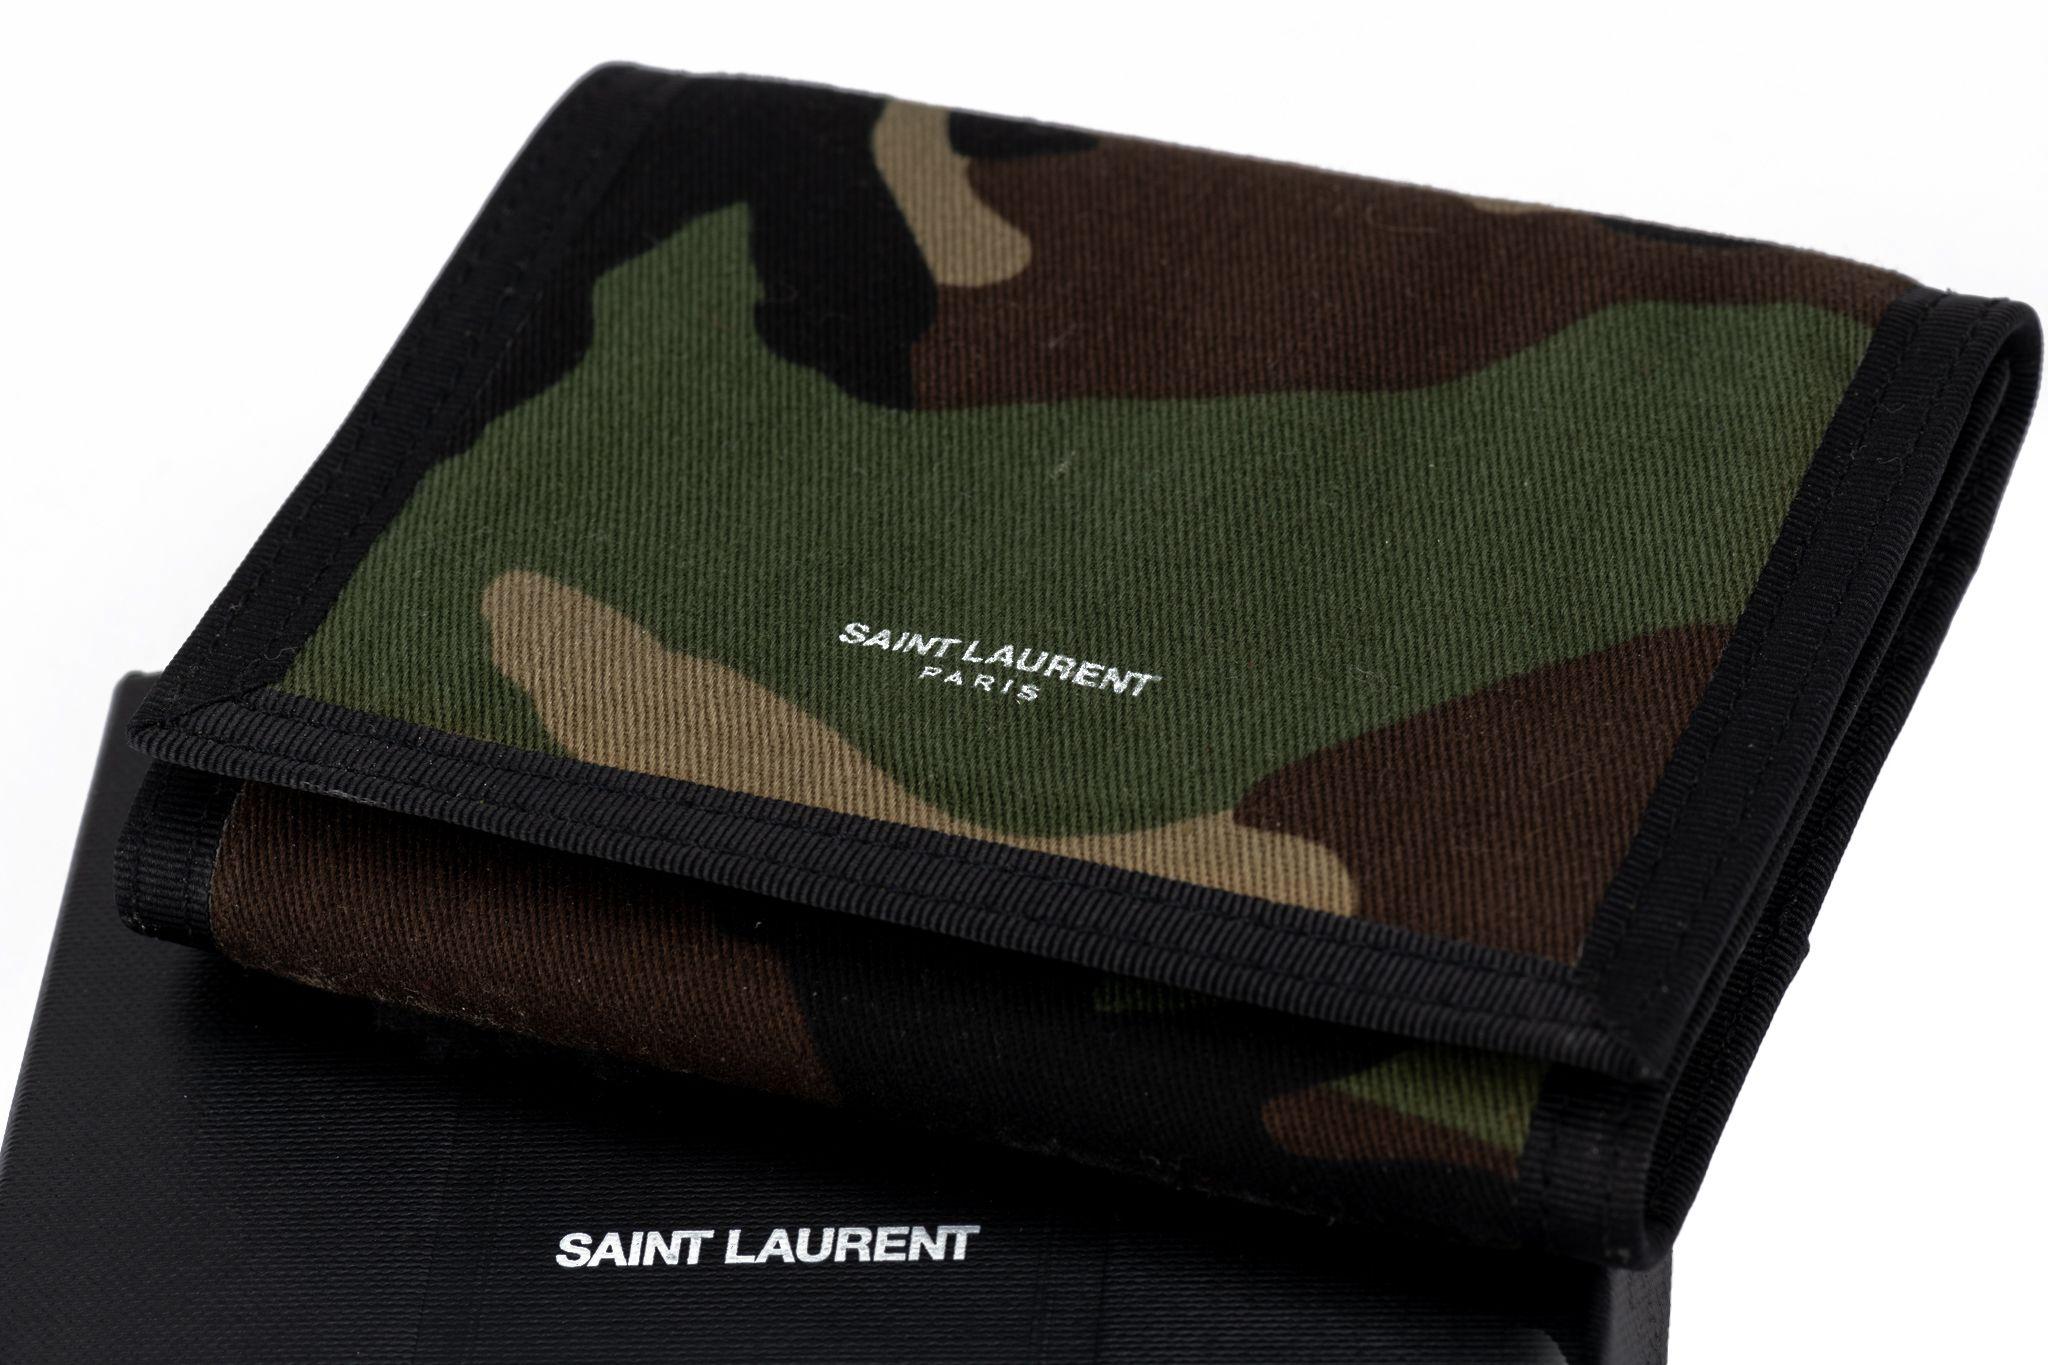 YSL new camouflage canvas wallet with multiple compartments.
Comes with booklet, original dustcover and box.